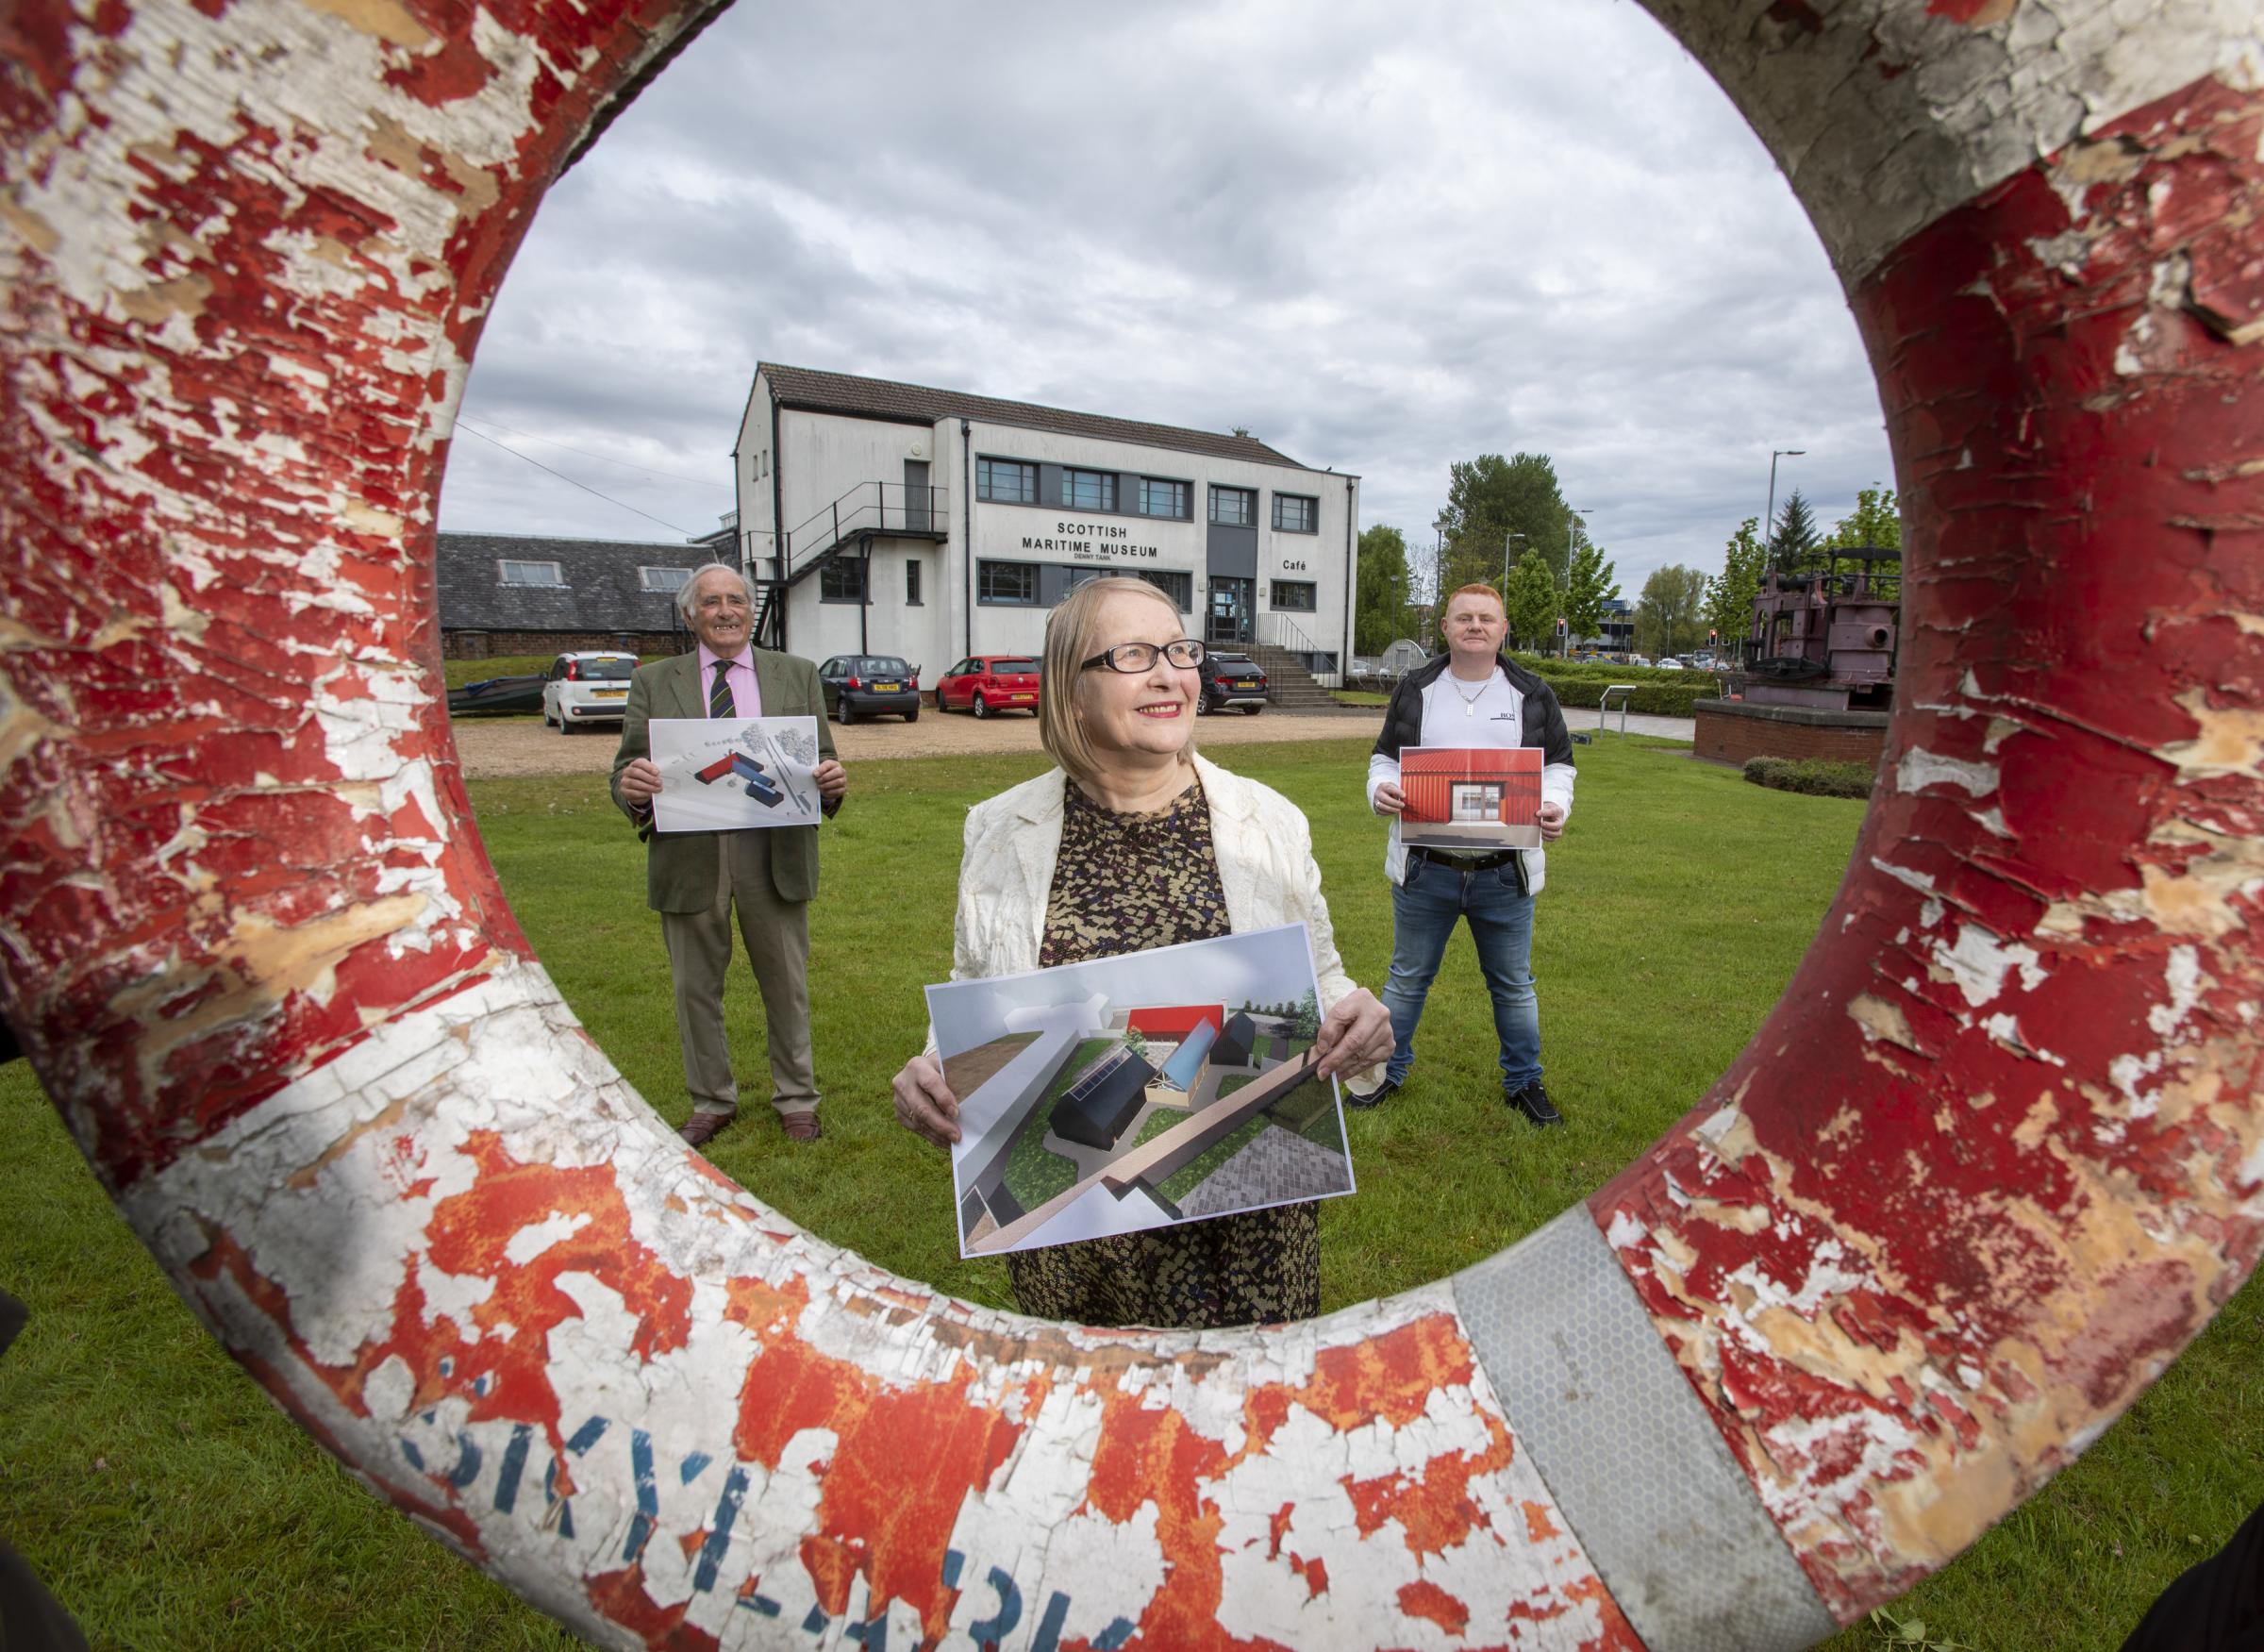 Veteran Hugh Spencer, Mary Burch of the Skylark IX Recovery Trust and James Currie from Alternatives Drug Recovery Service celebrate ambitious plans to secure a bright future for the much-loved Skylark IX ‘Dunkirk Little Ship’ at the heart of